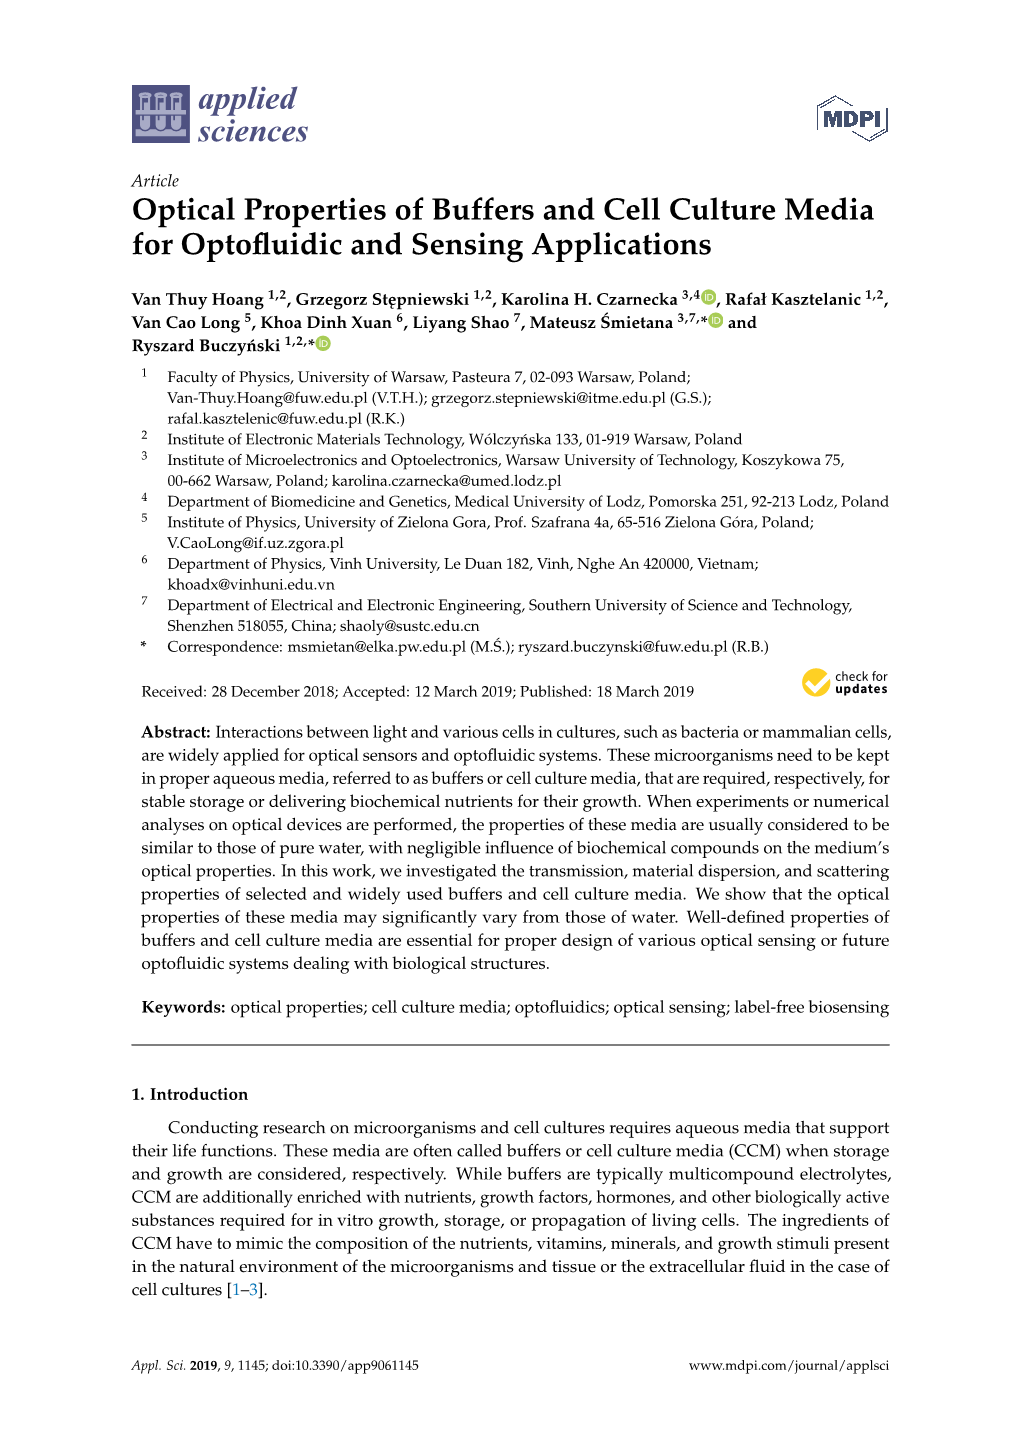 Optical Properties of Buffers and Cell Culture Media for Optofluidic And